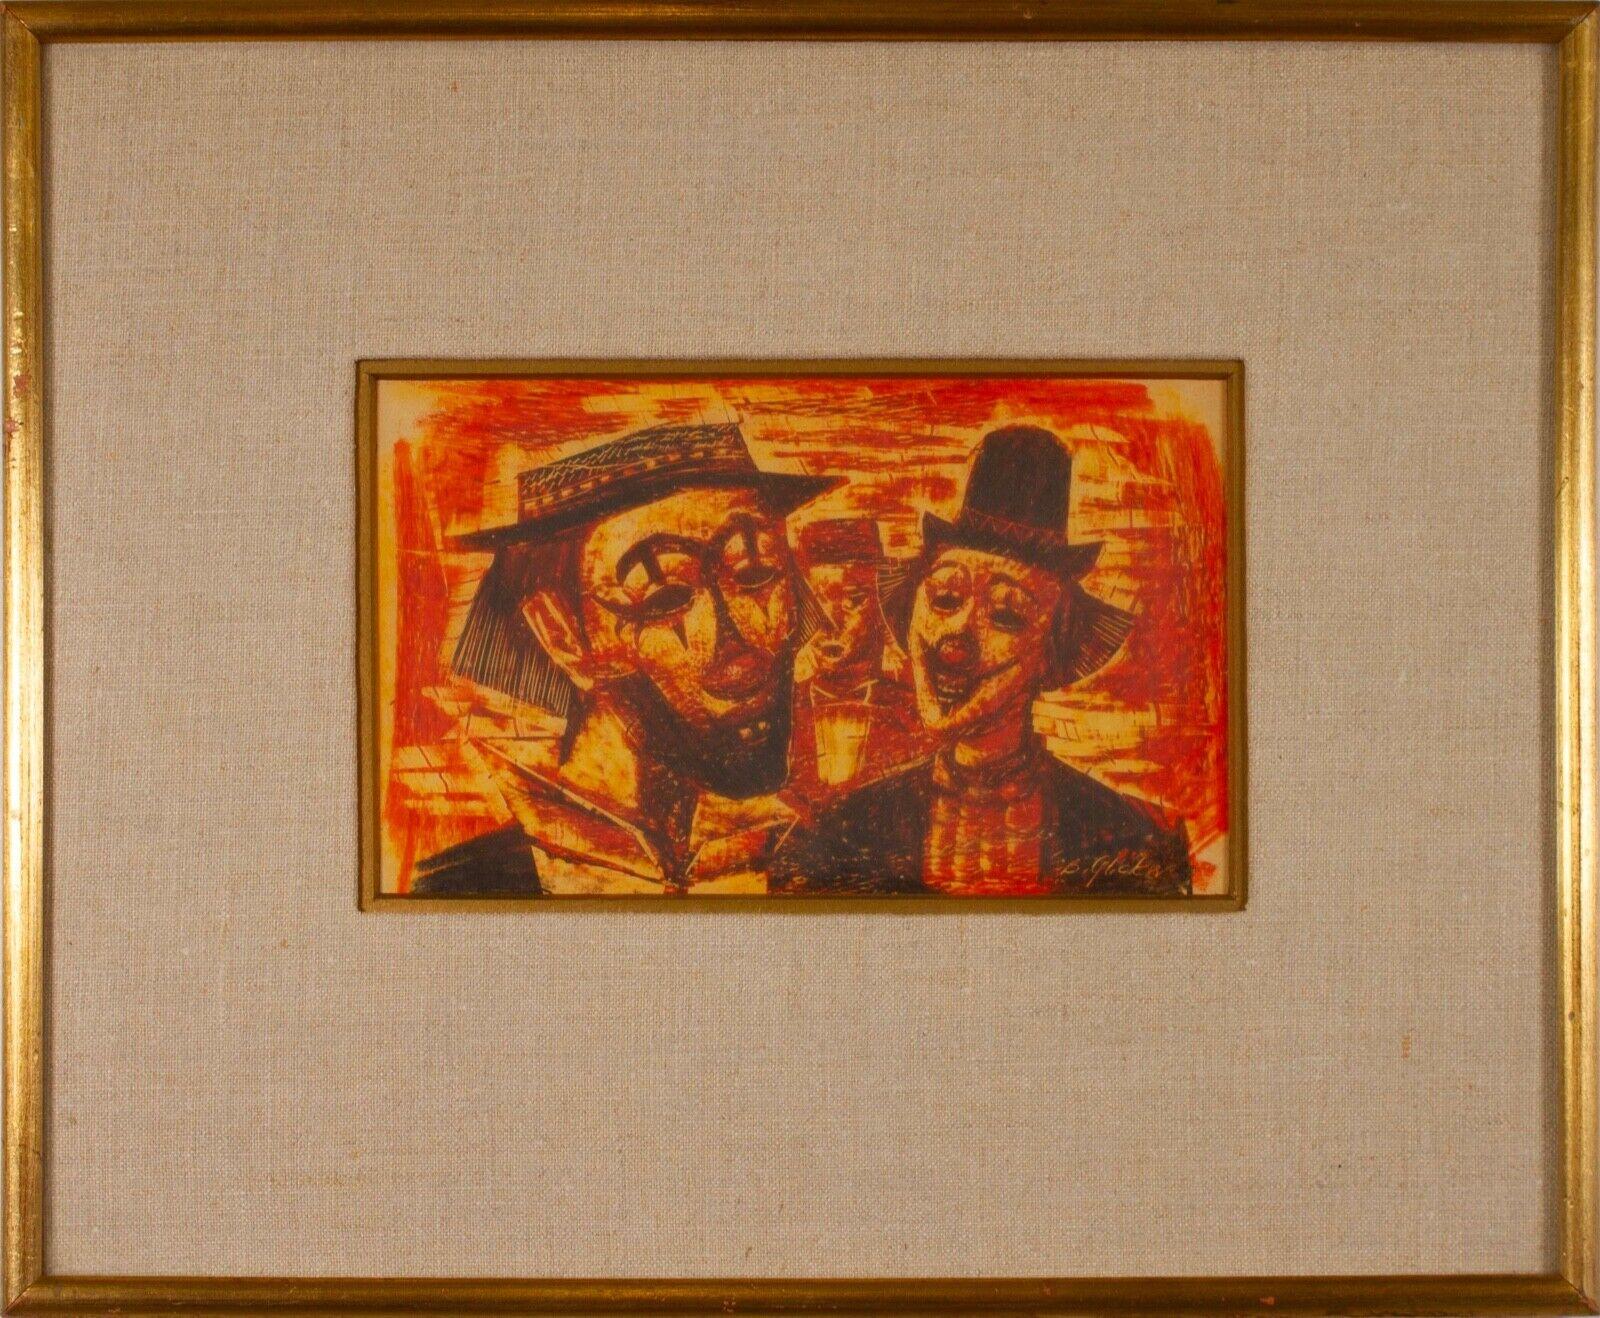 An expressive mid-century modern mixed media color graphite drawing on paper depicting a two clowns by Michigan based artist Benjamin Glicker. Signed bottom right. Circa 1960s. Benjamin Glicker was an influential teacher in Michigan throughout the